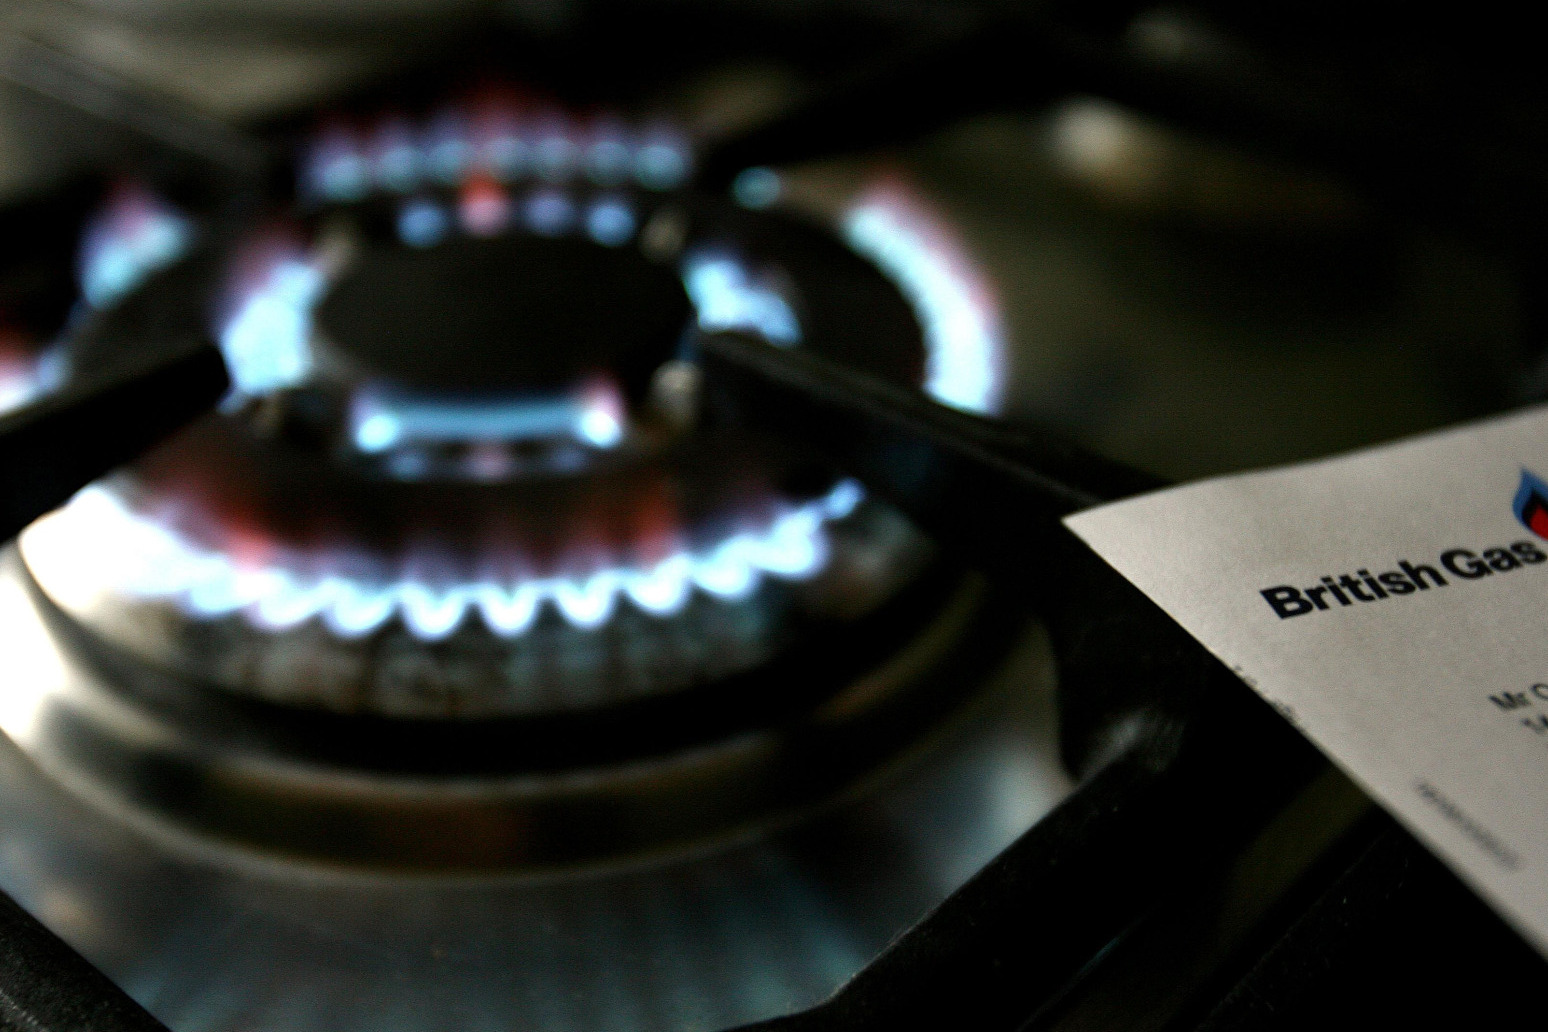 British Gas pledges to donate 10 of profit as energy price cap expected to rise